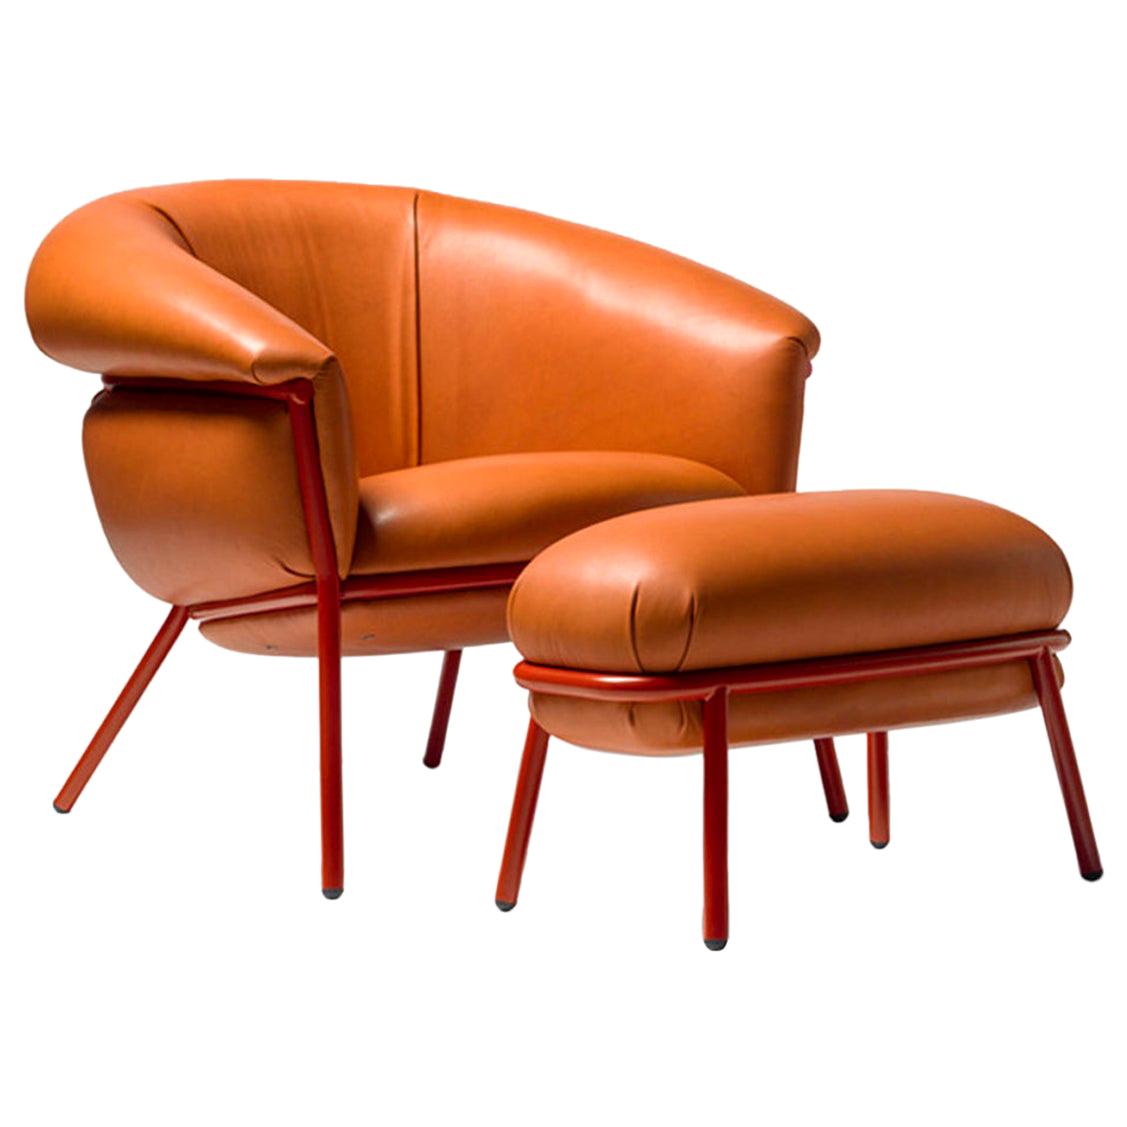 Stephen Burks Contemporary Grasso Orange Leather Armchair and Foot Stool